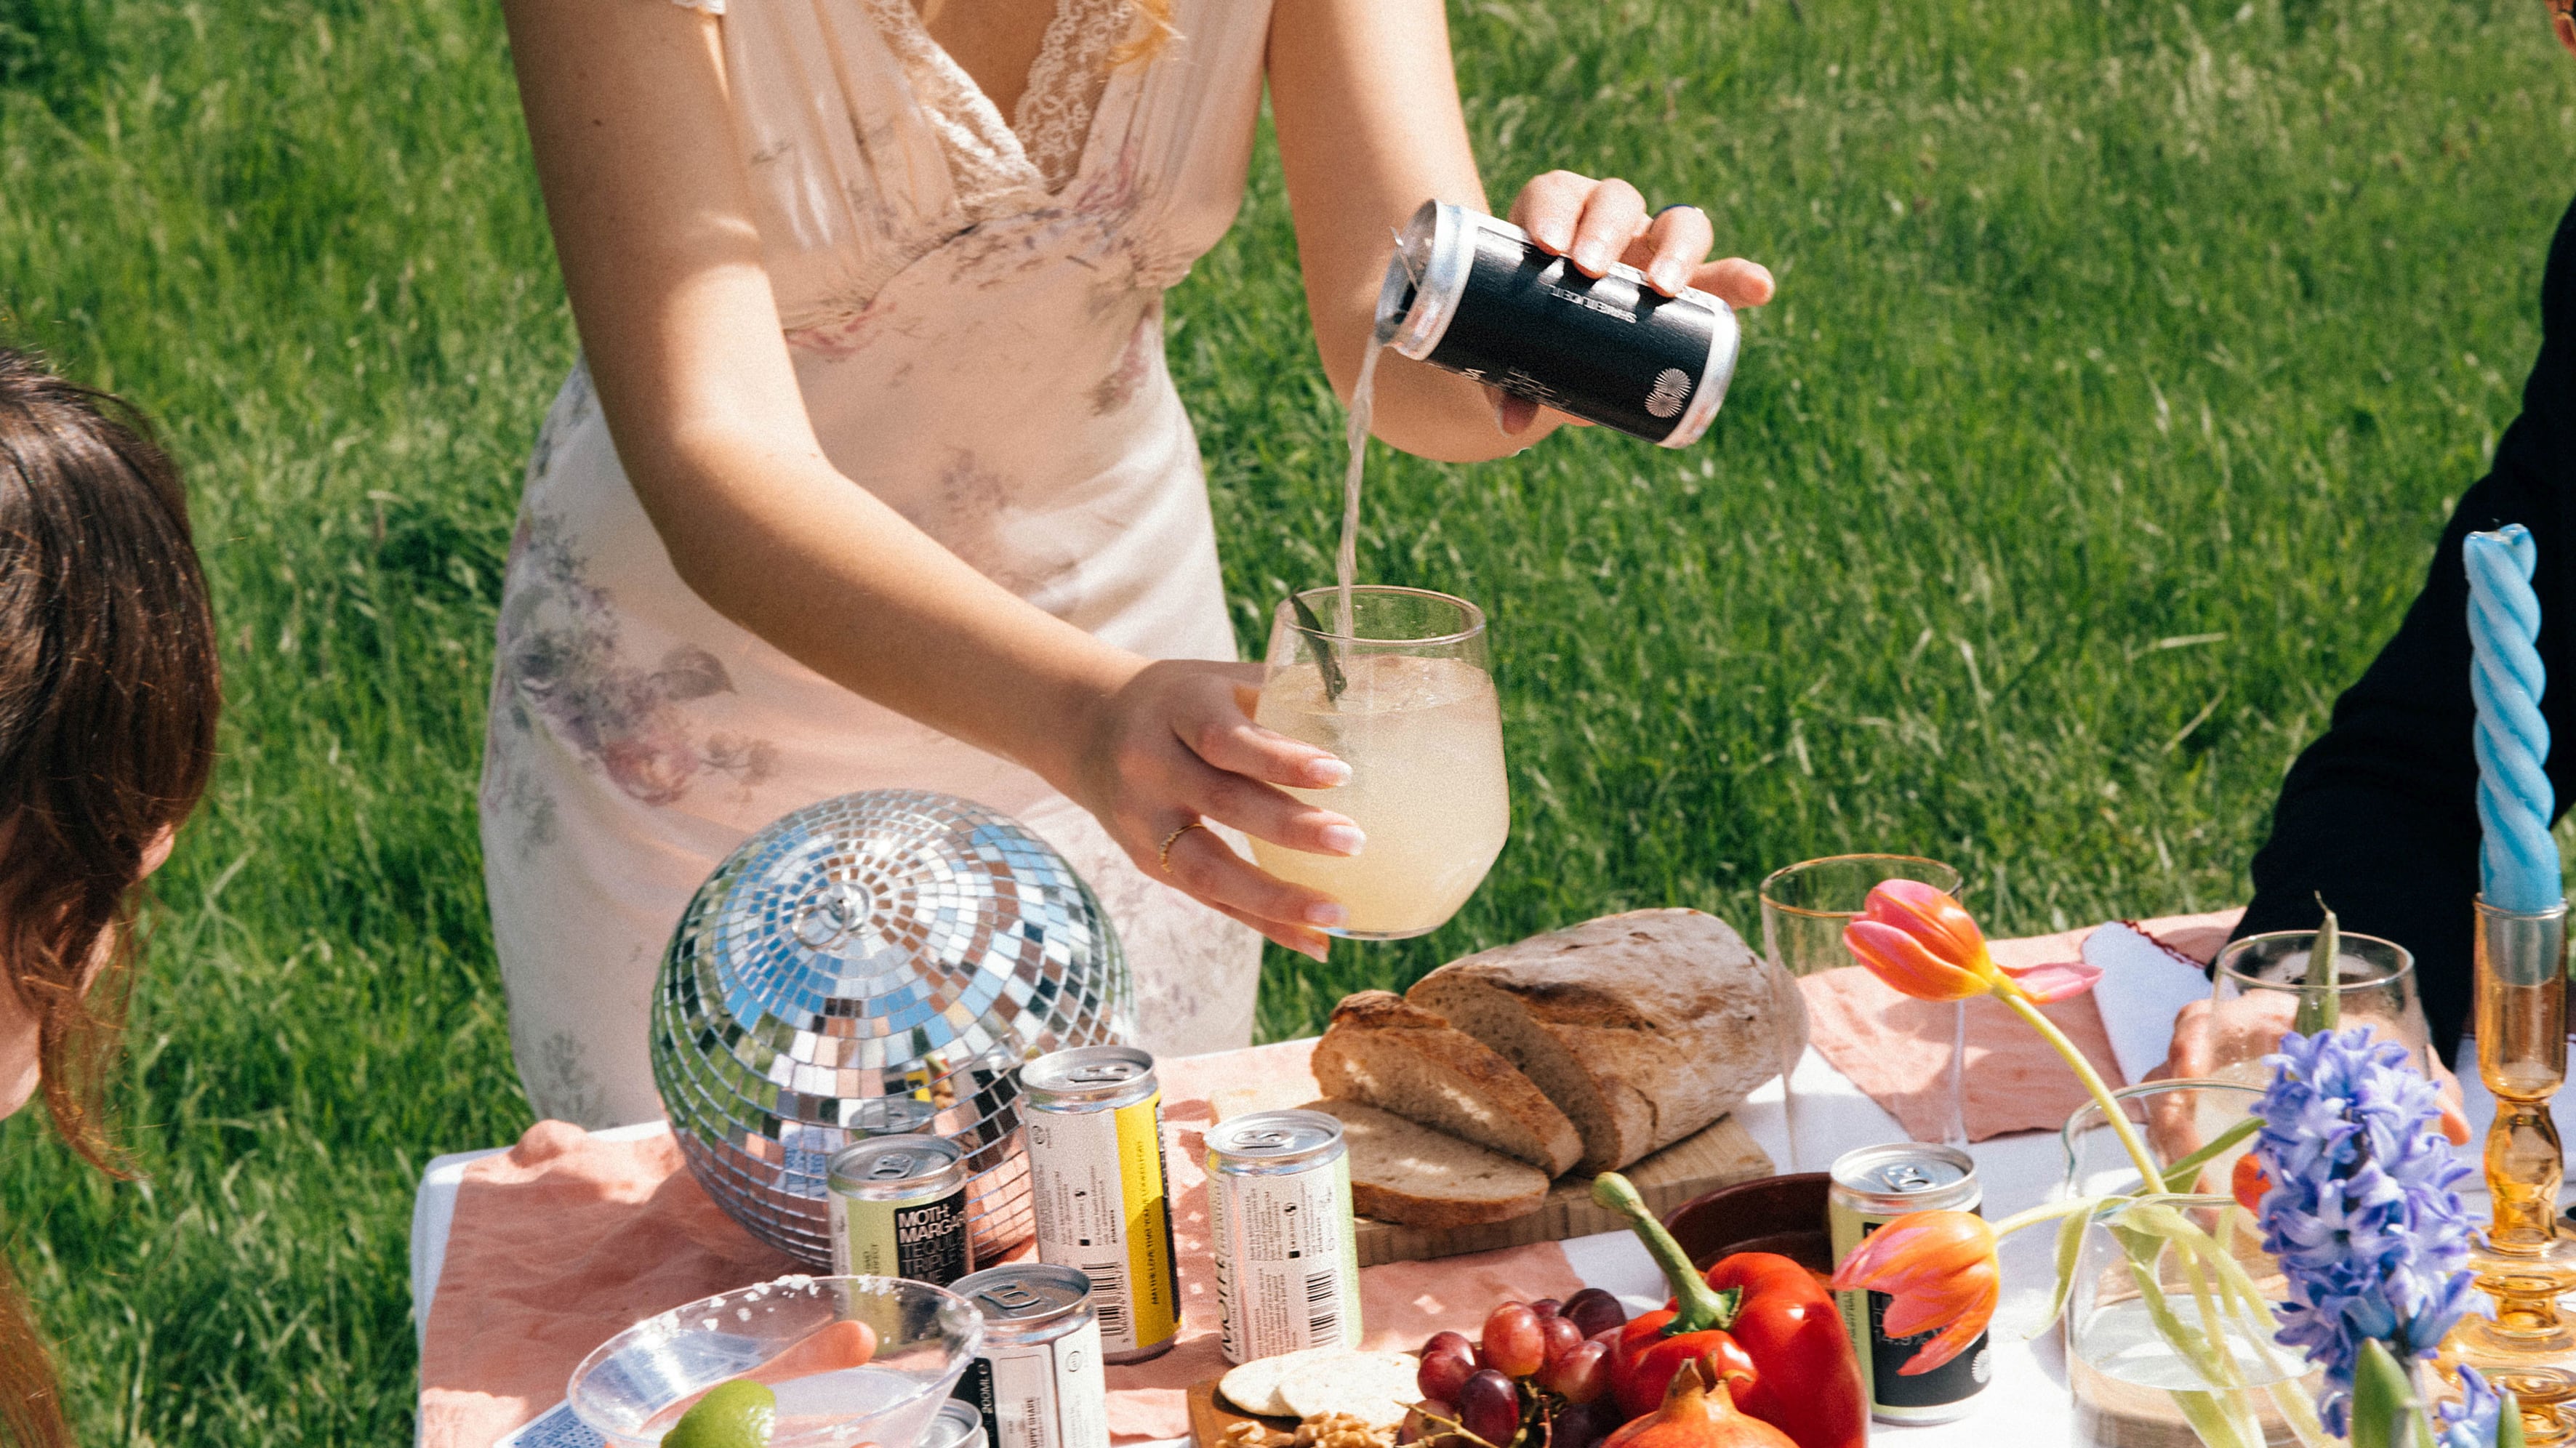 These boozy beverages are perfect for outdoor soirées